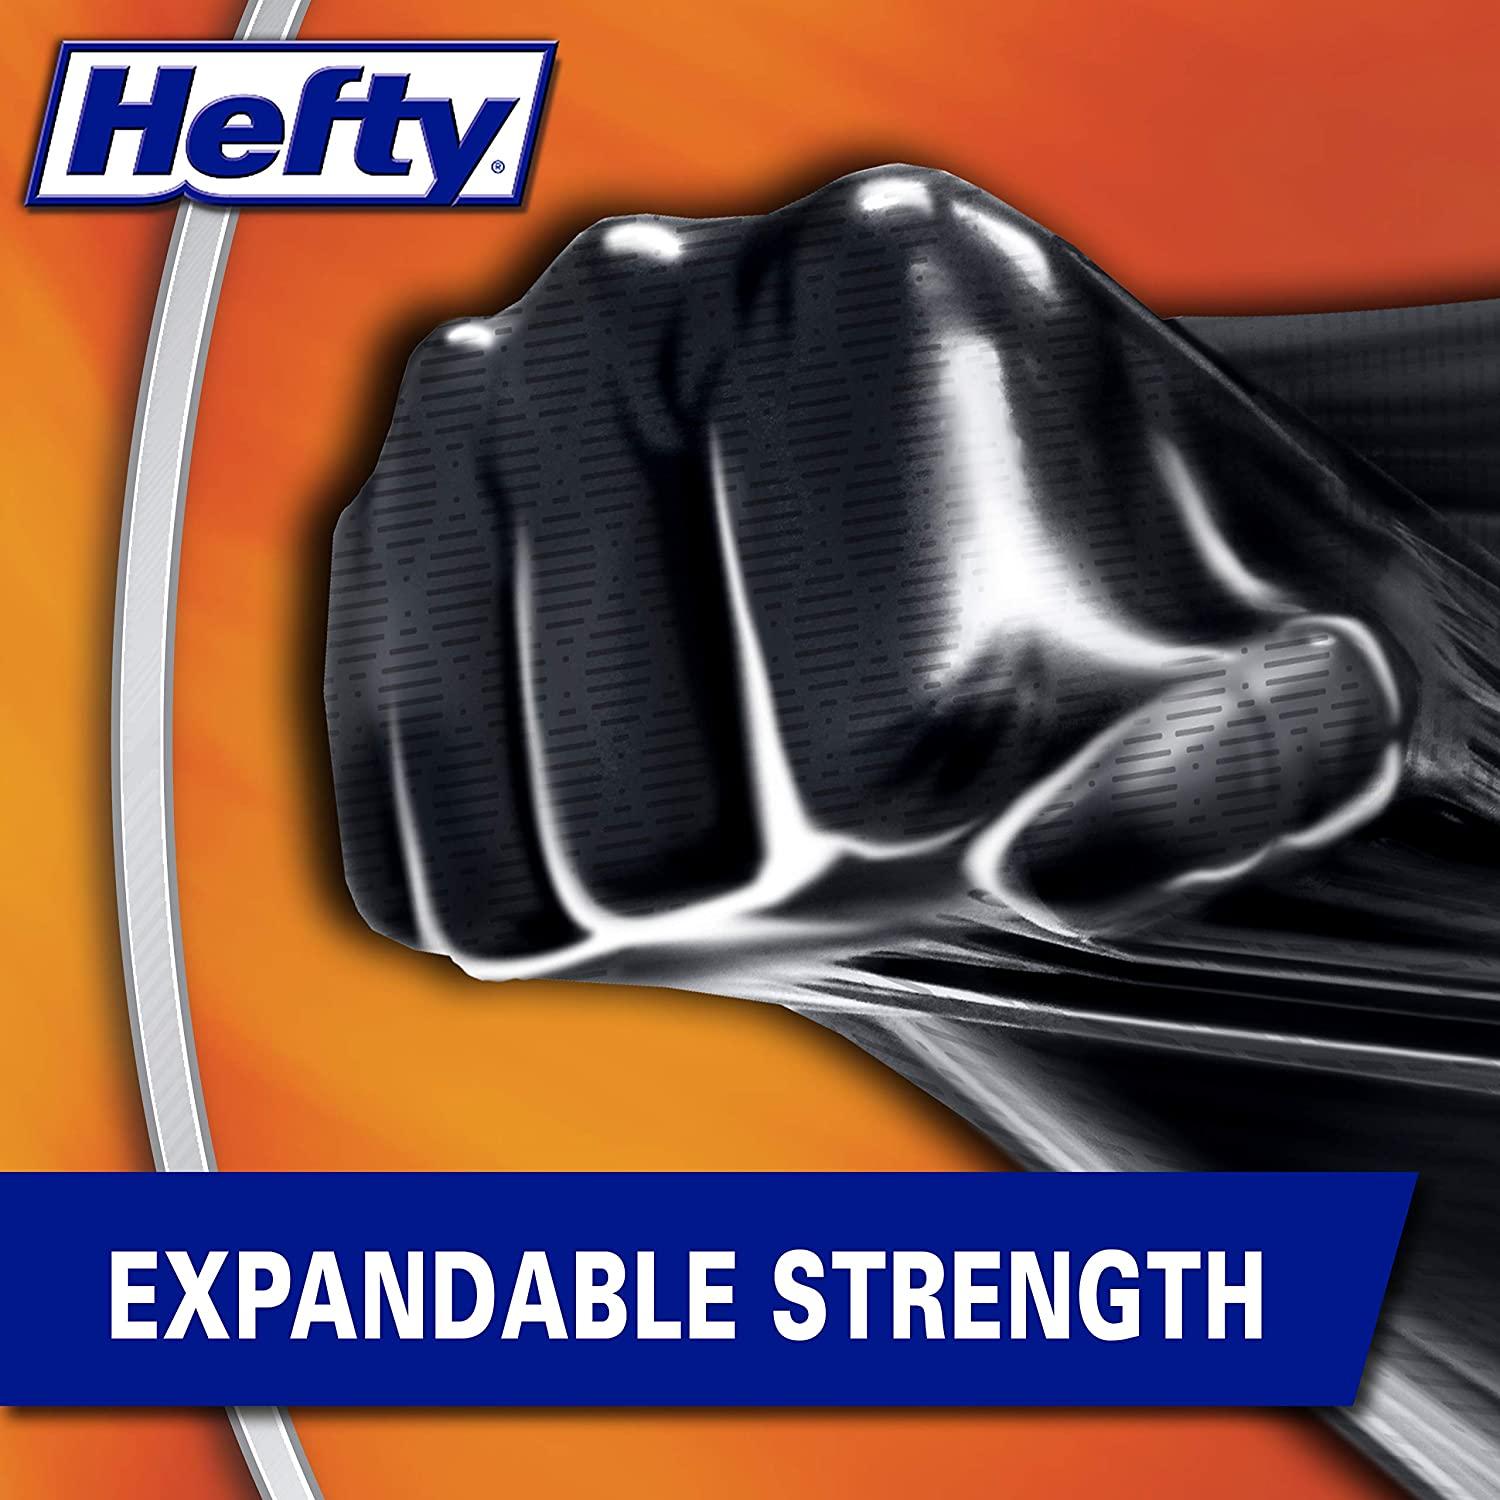 Hefty Ultra Strong Multipurpose Large Trash Bags, Black, White Pine Breeze  Scent, 30 Gallon, 25 Count